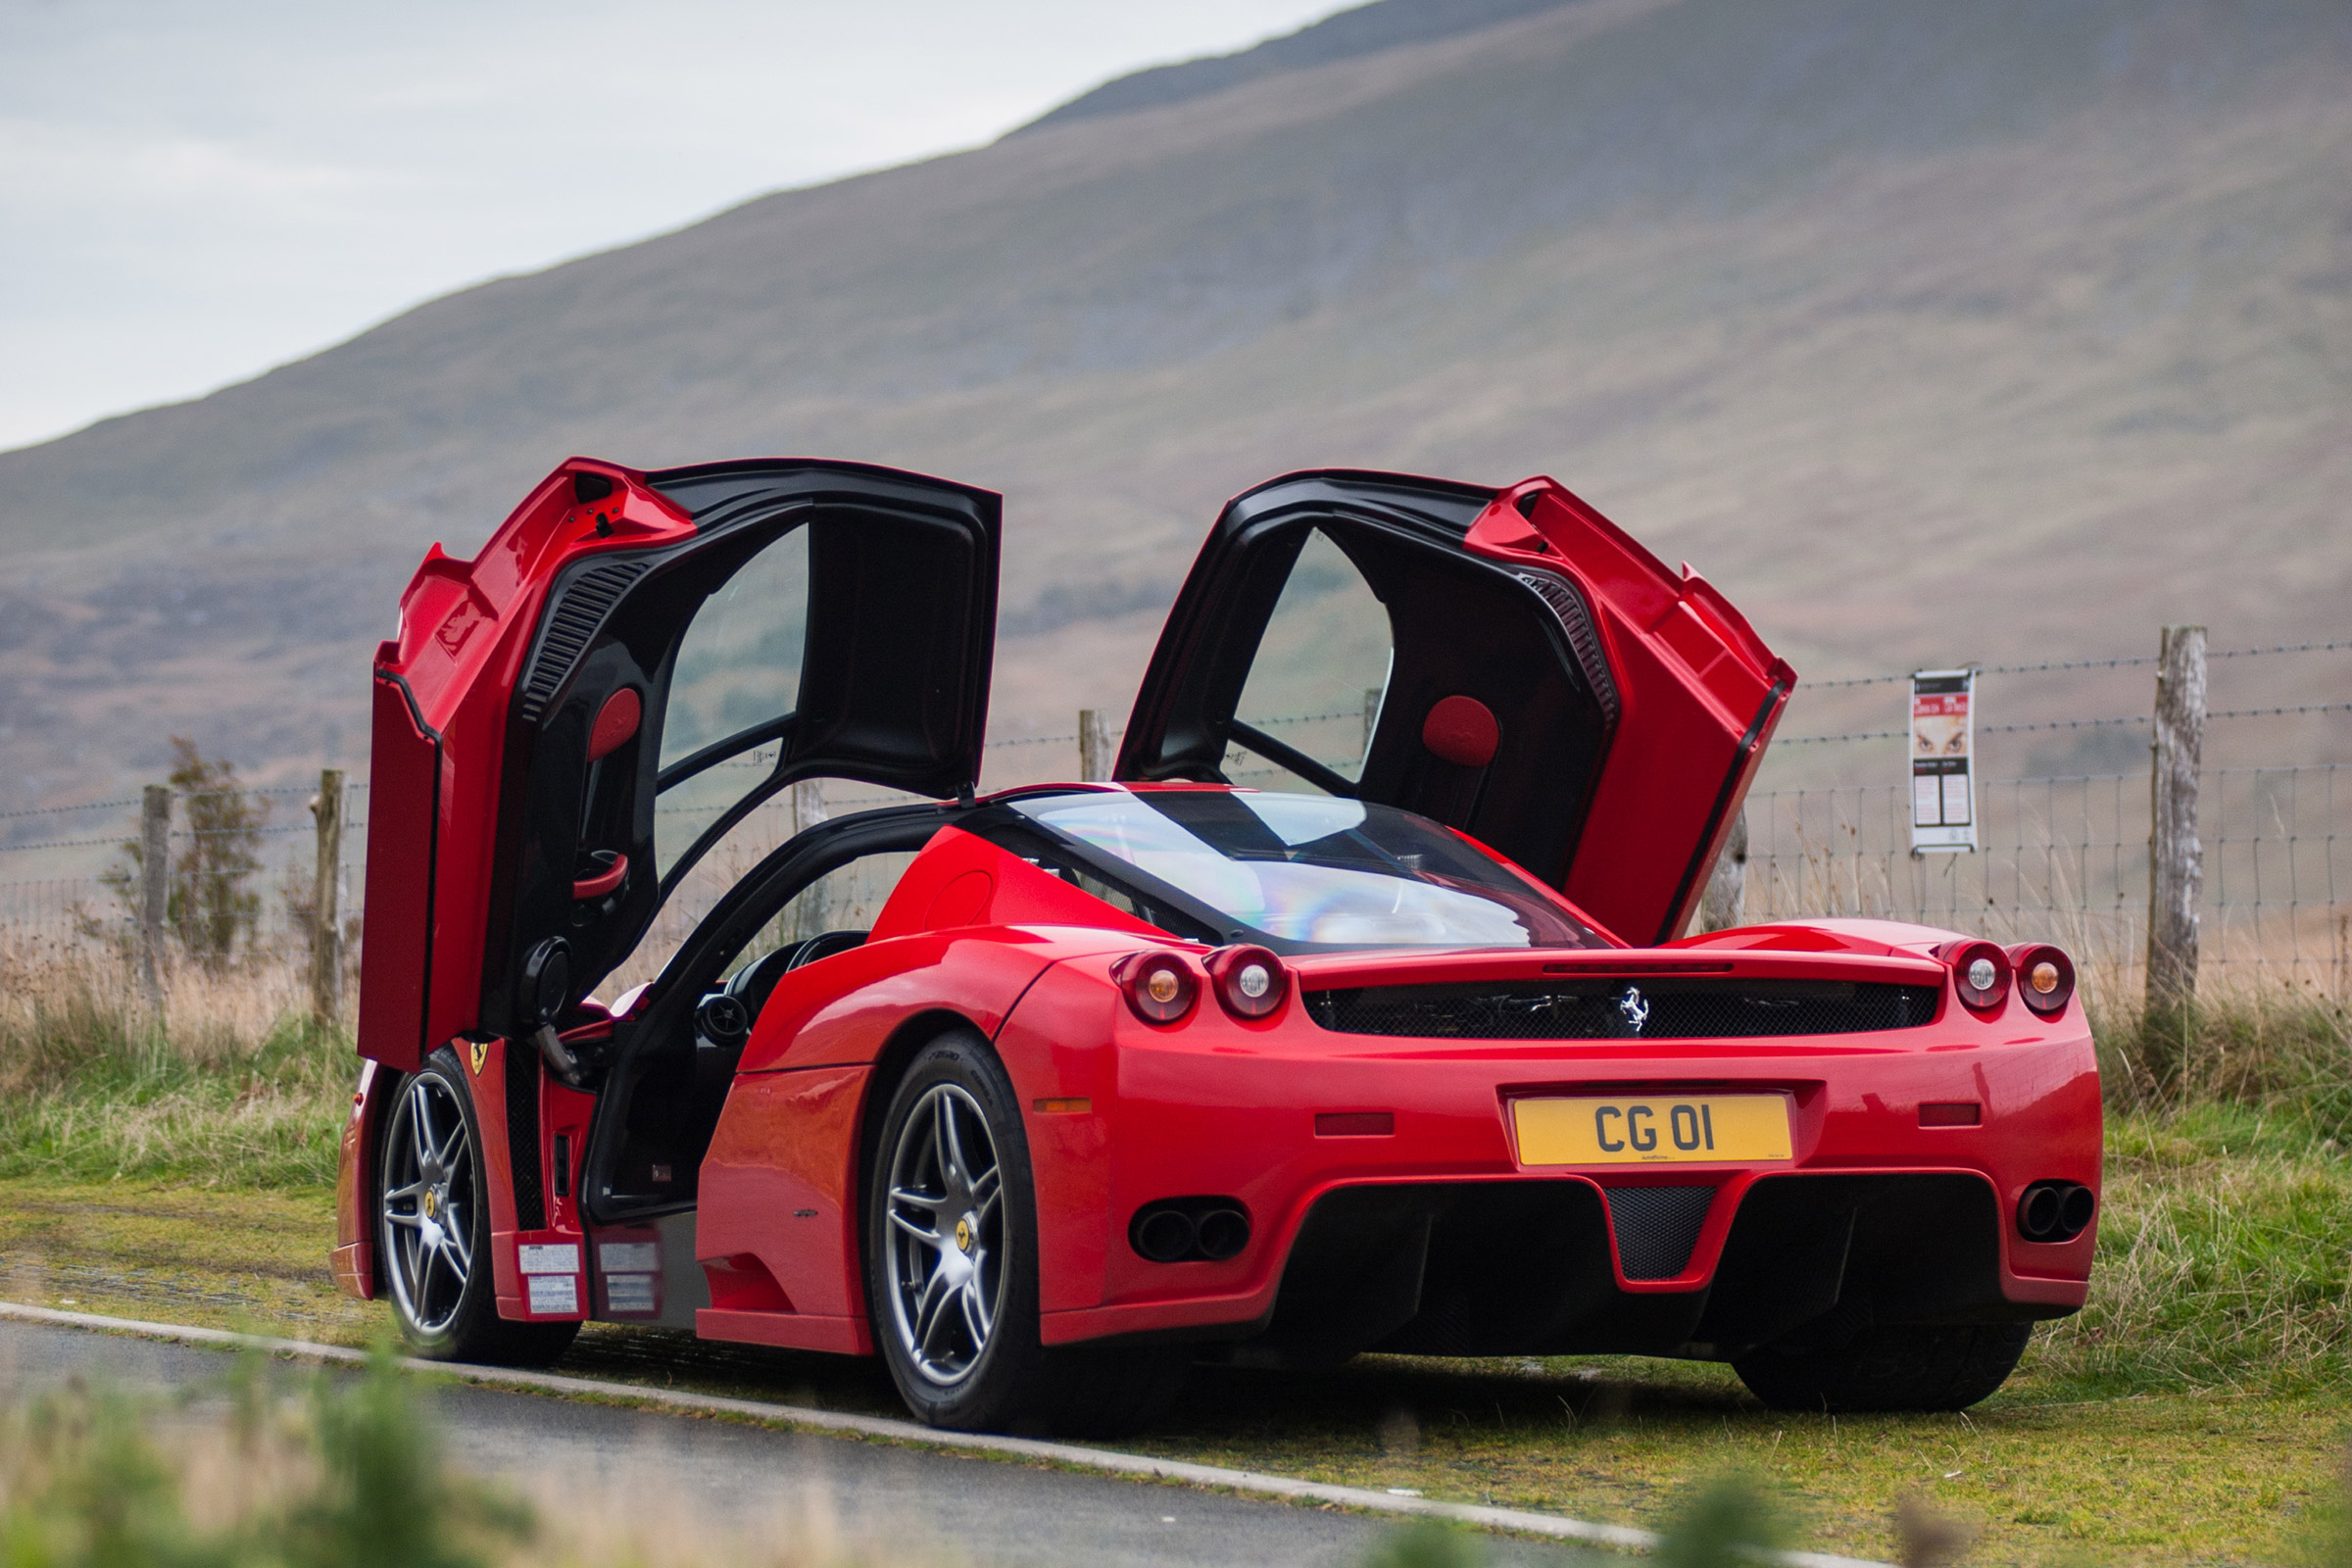 efterligne rotation vedholdende Ferrari Enzo: history, reviews and specs of an icon | evo